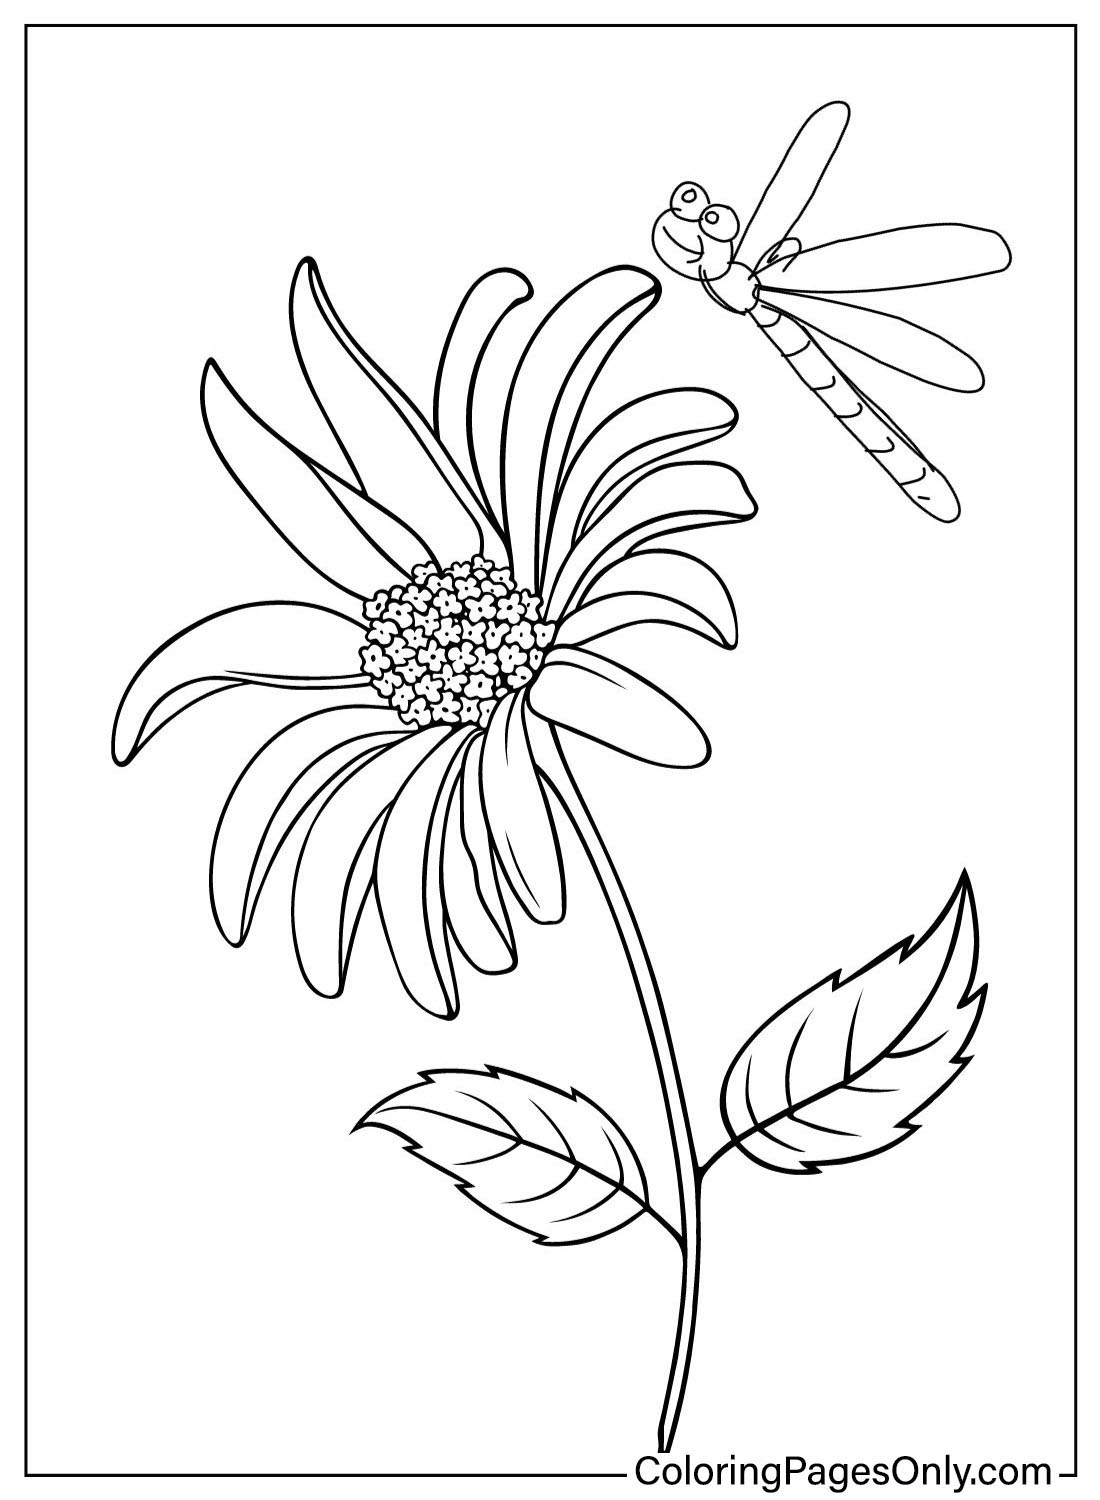 Sunflower Coloring To Print